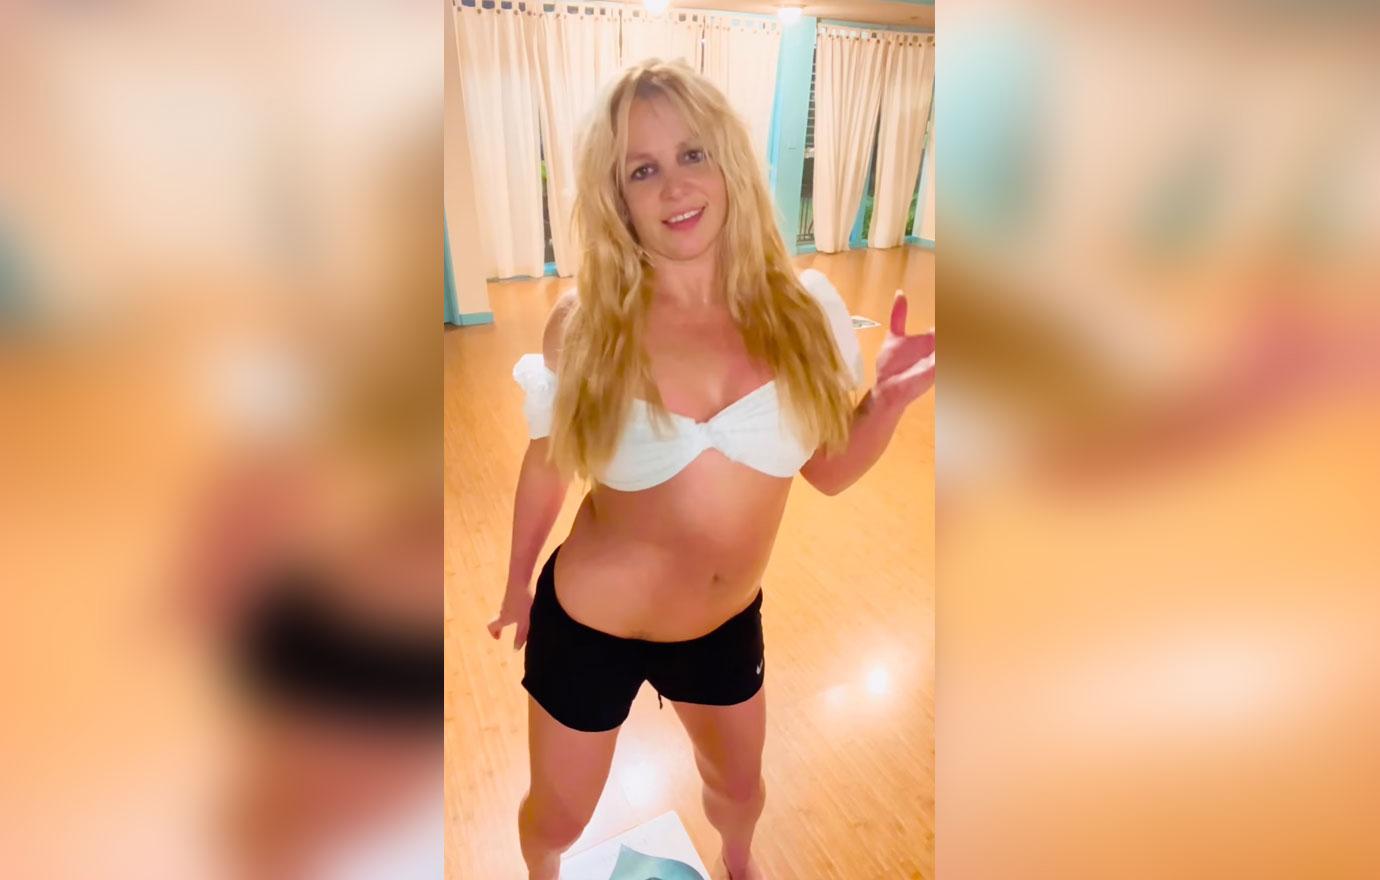 Model Ireland Basinger Baldwin lets her breasts hang out as she urges  people to vote (photos)